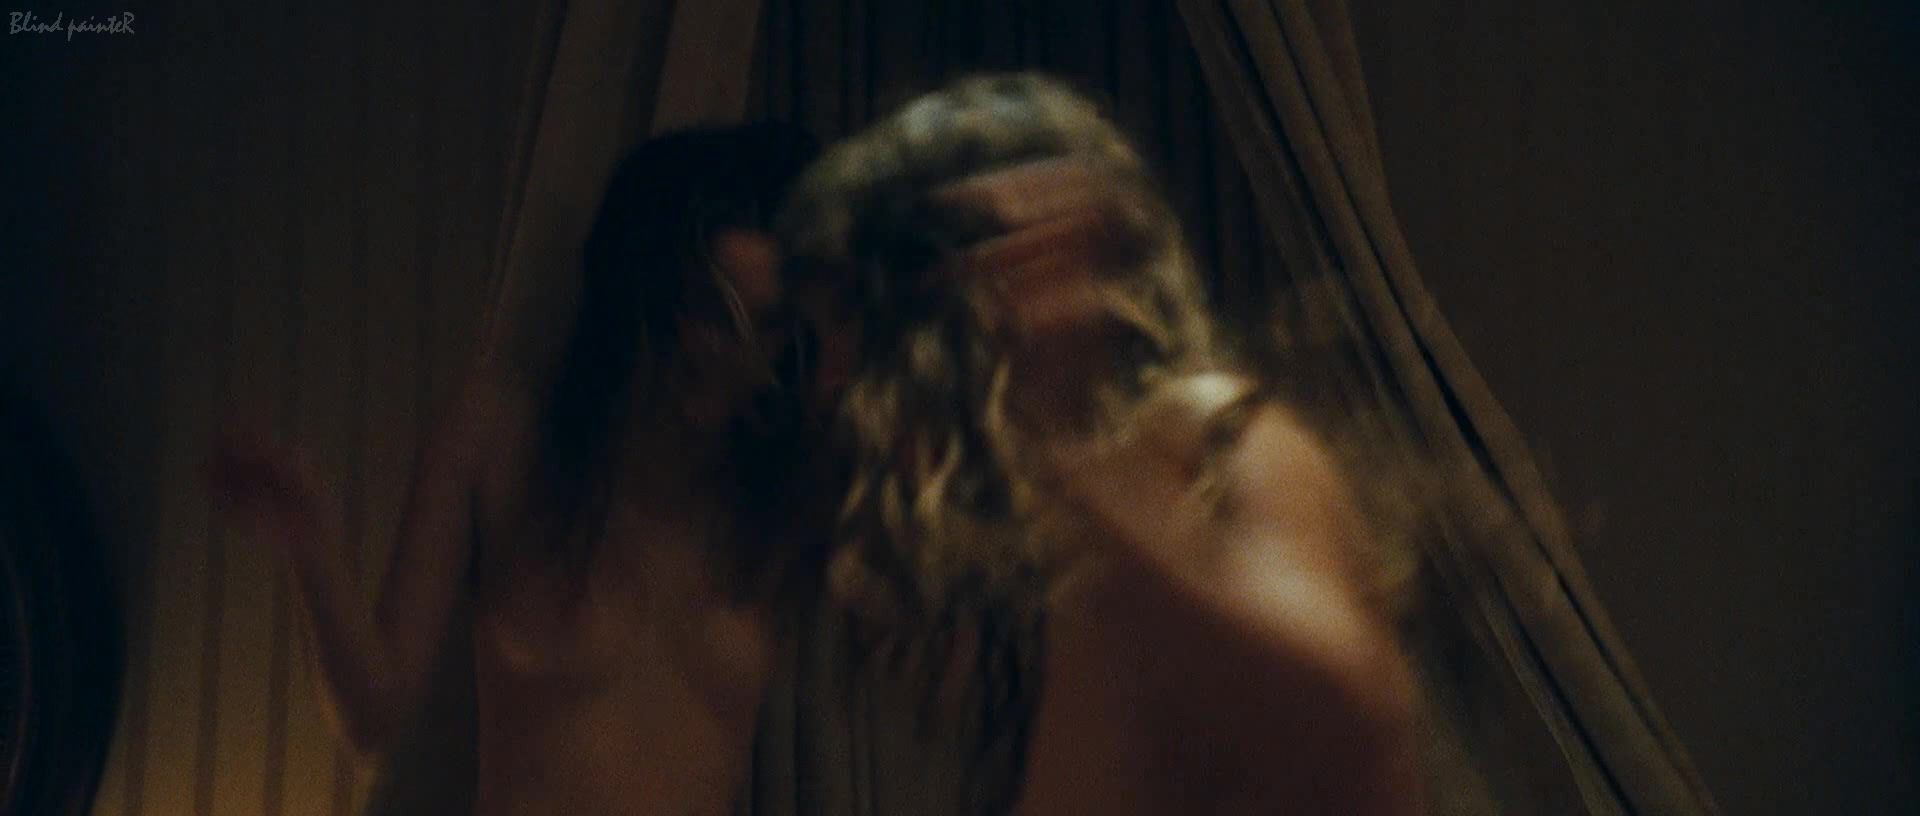 Peeing Camille Rowe - Our Day Will Come (Notre Jour Viendra)  (2010) Fingering - 1